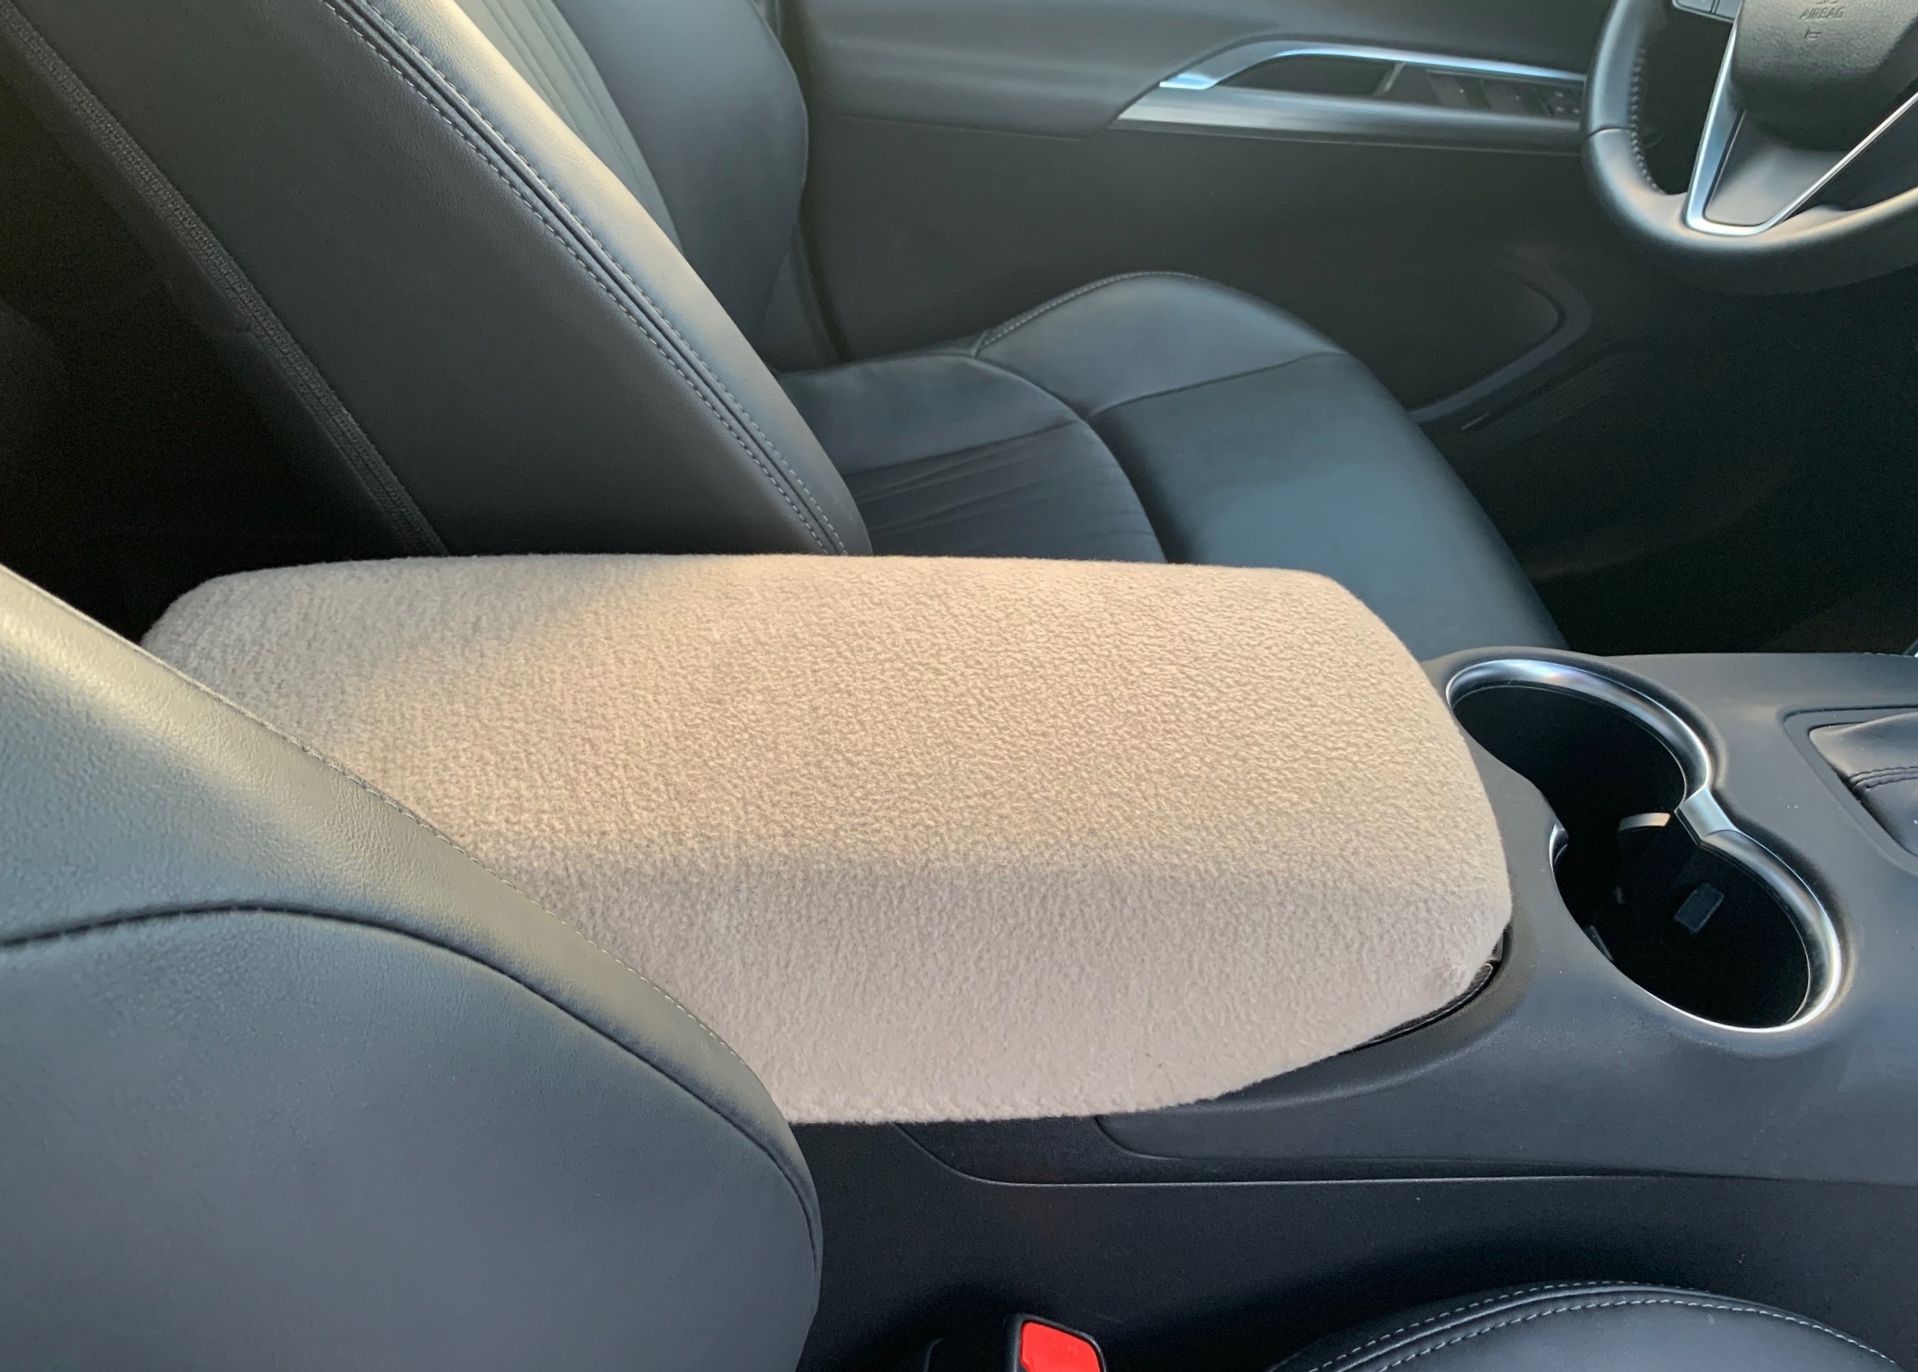 Buy Fleece Center Console Armrest Cover fits the Toyota Venza 2021-2022